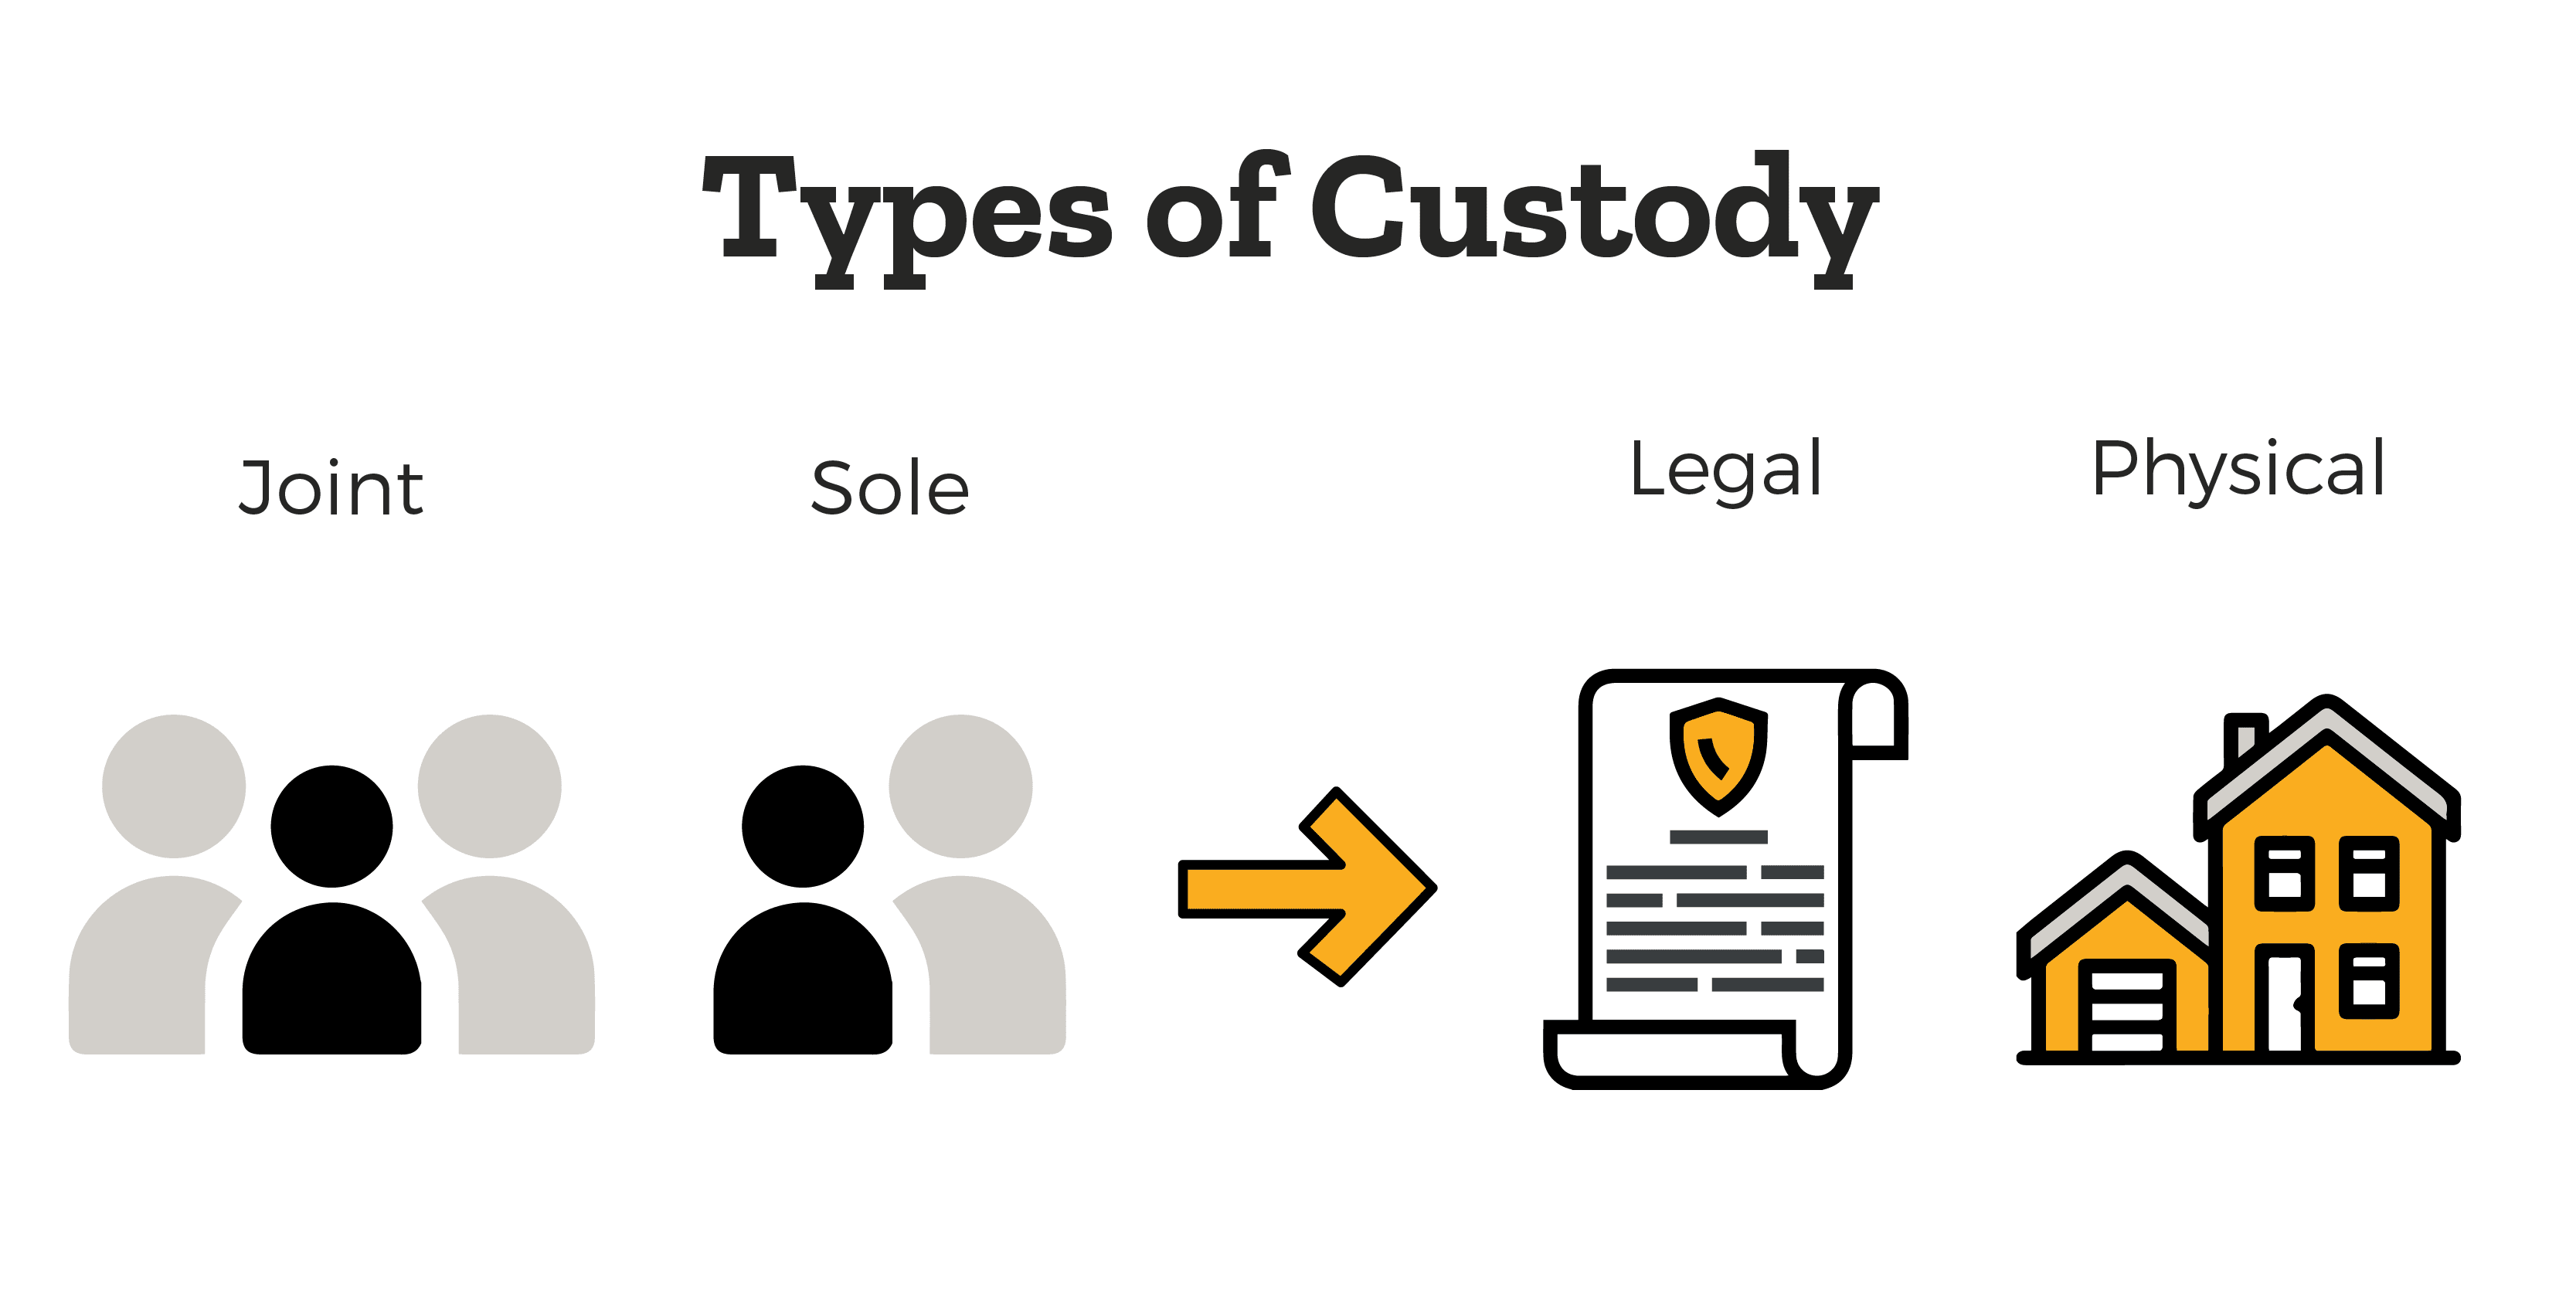 There are two types of custody: legal custody and physical custody. Custody of a child can be joint, or shared between two people, or sole, with only a single person having legal control of the child’s rights.